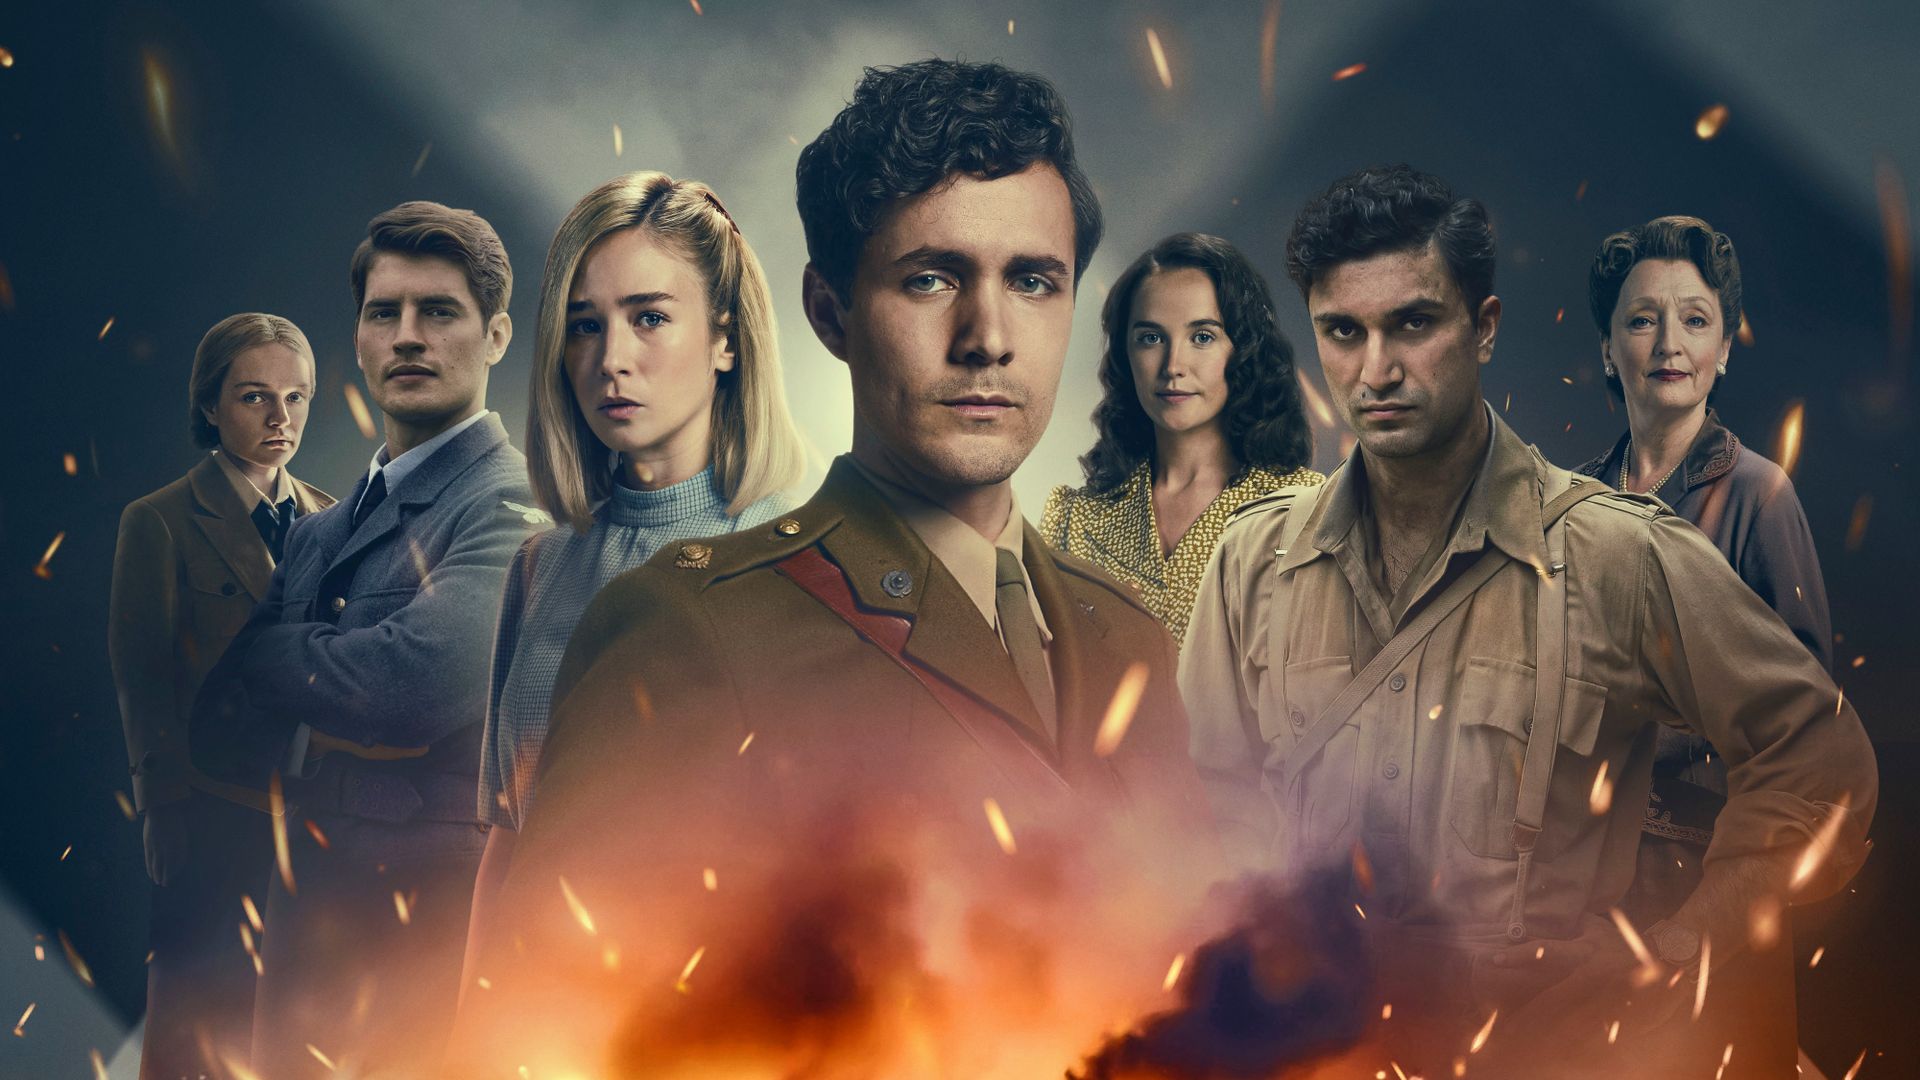 World on Fire is back for season 2